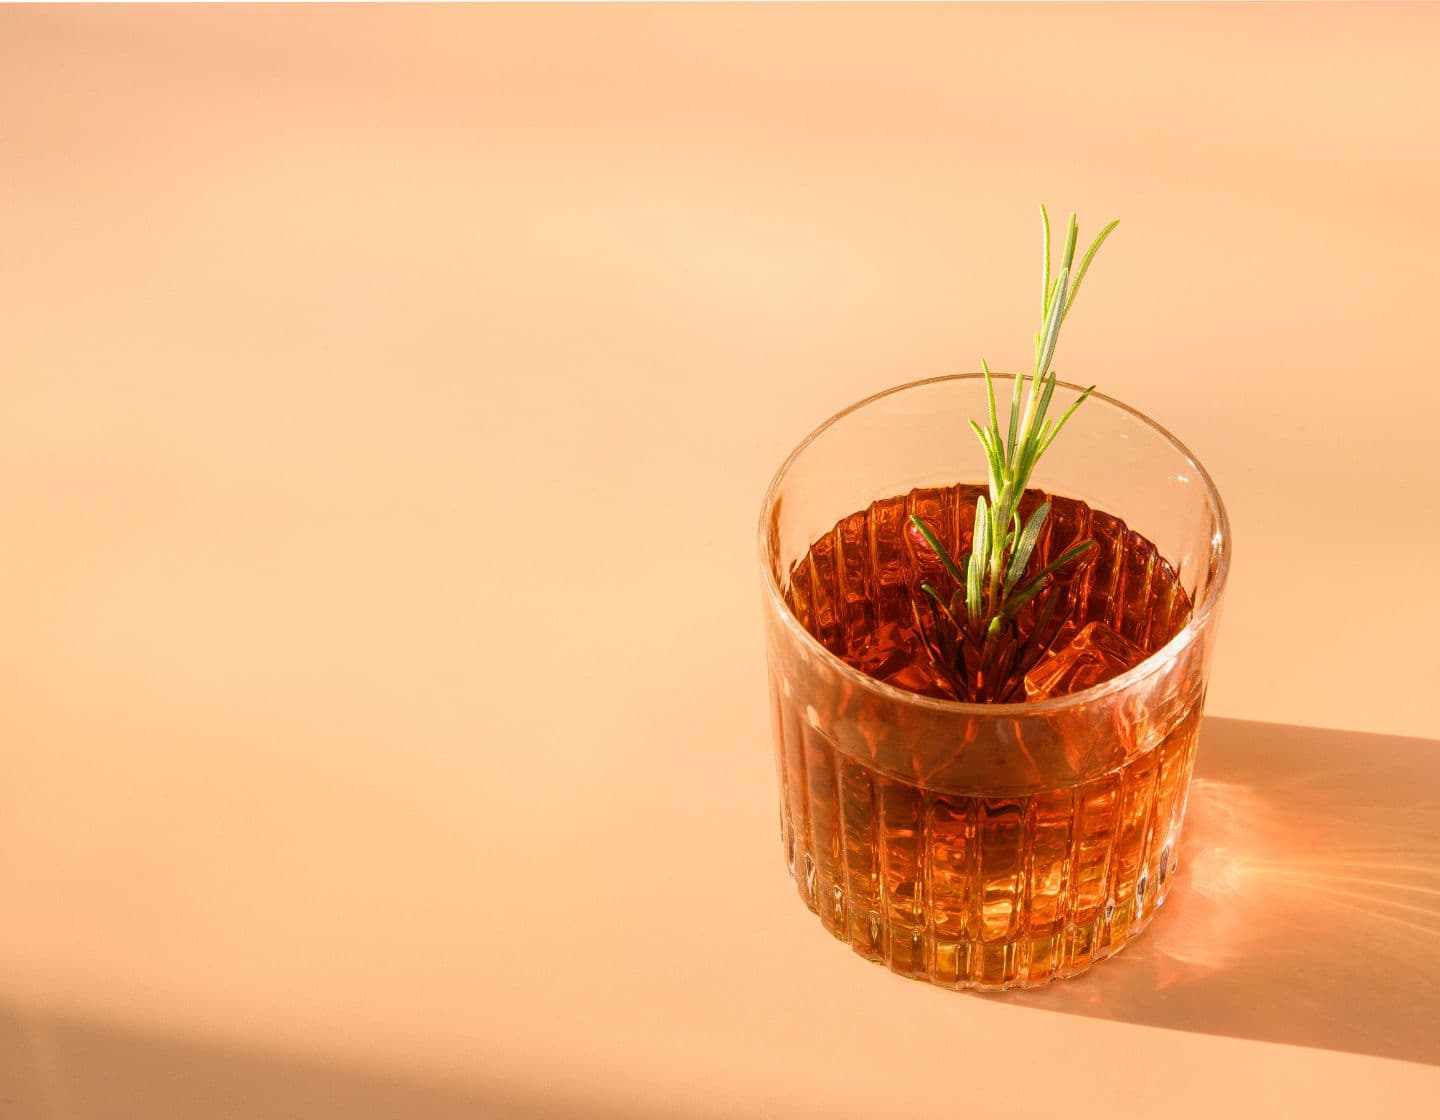 Whiskey cocktail garnished with sprig.